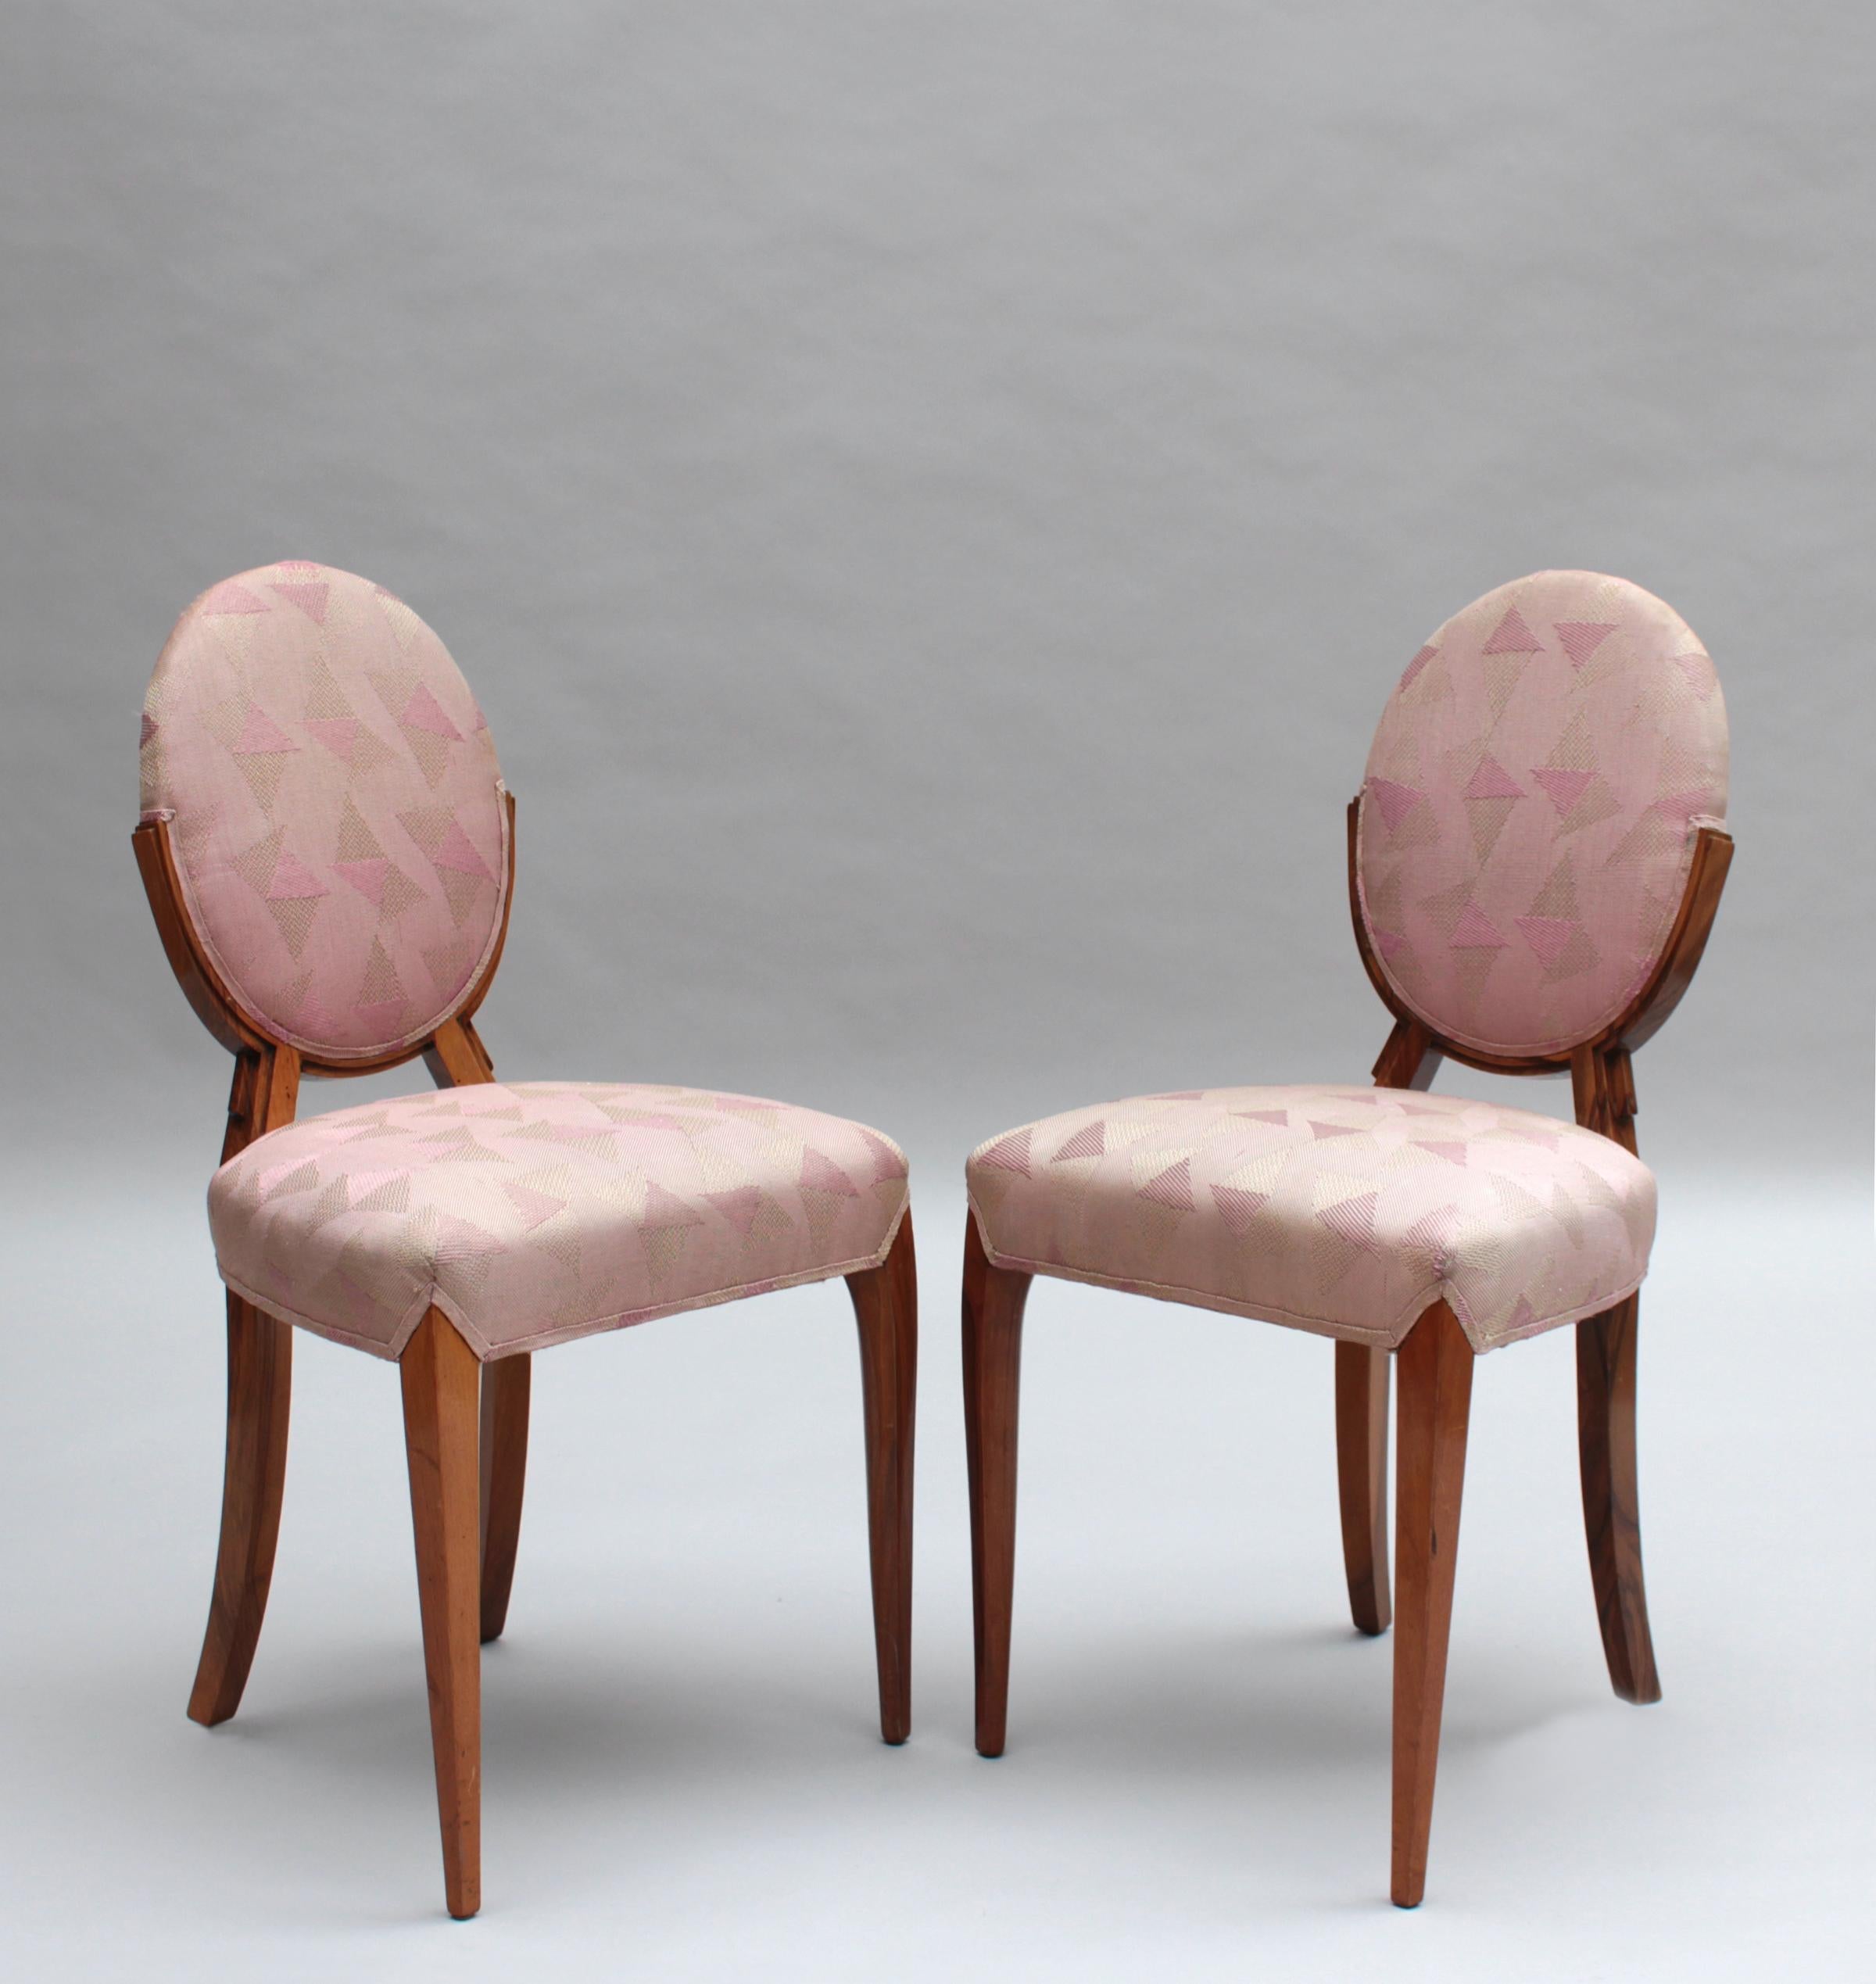 Early 20th Century A Pair of Fine French Art Deco Walnut Side Chairs by D.I.M